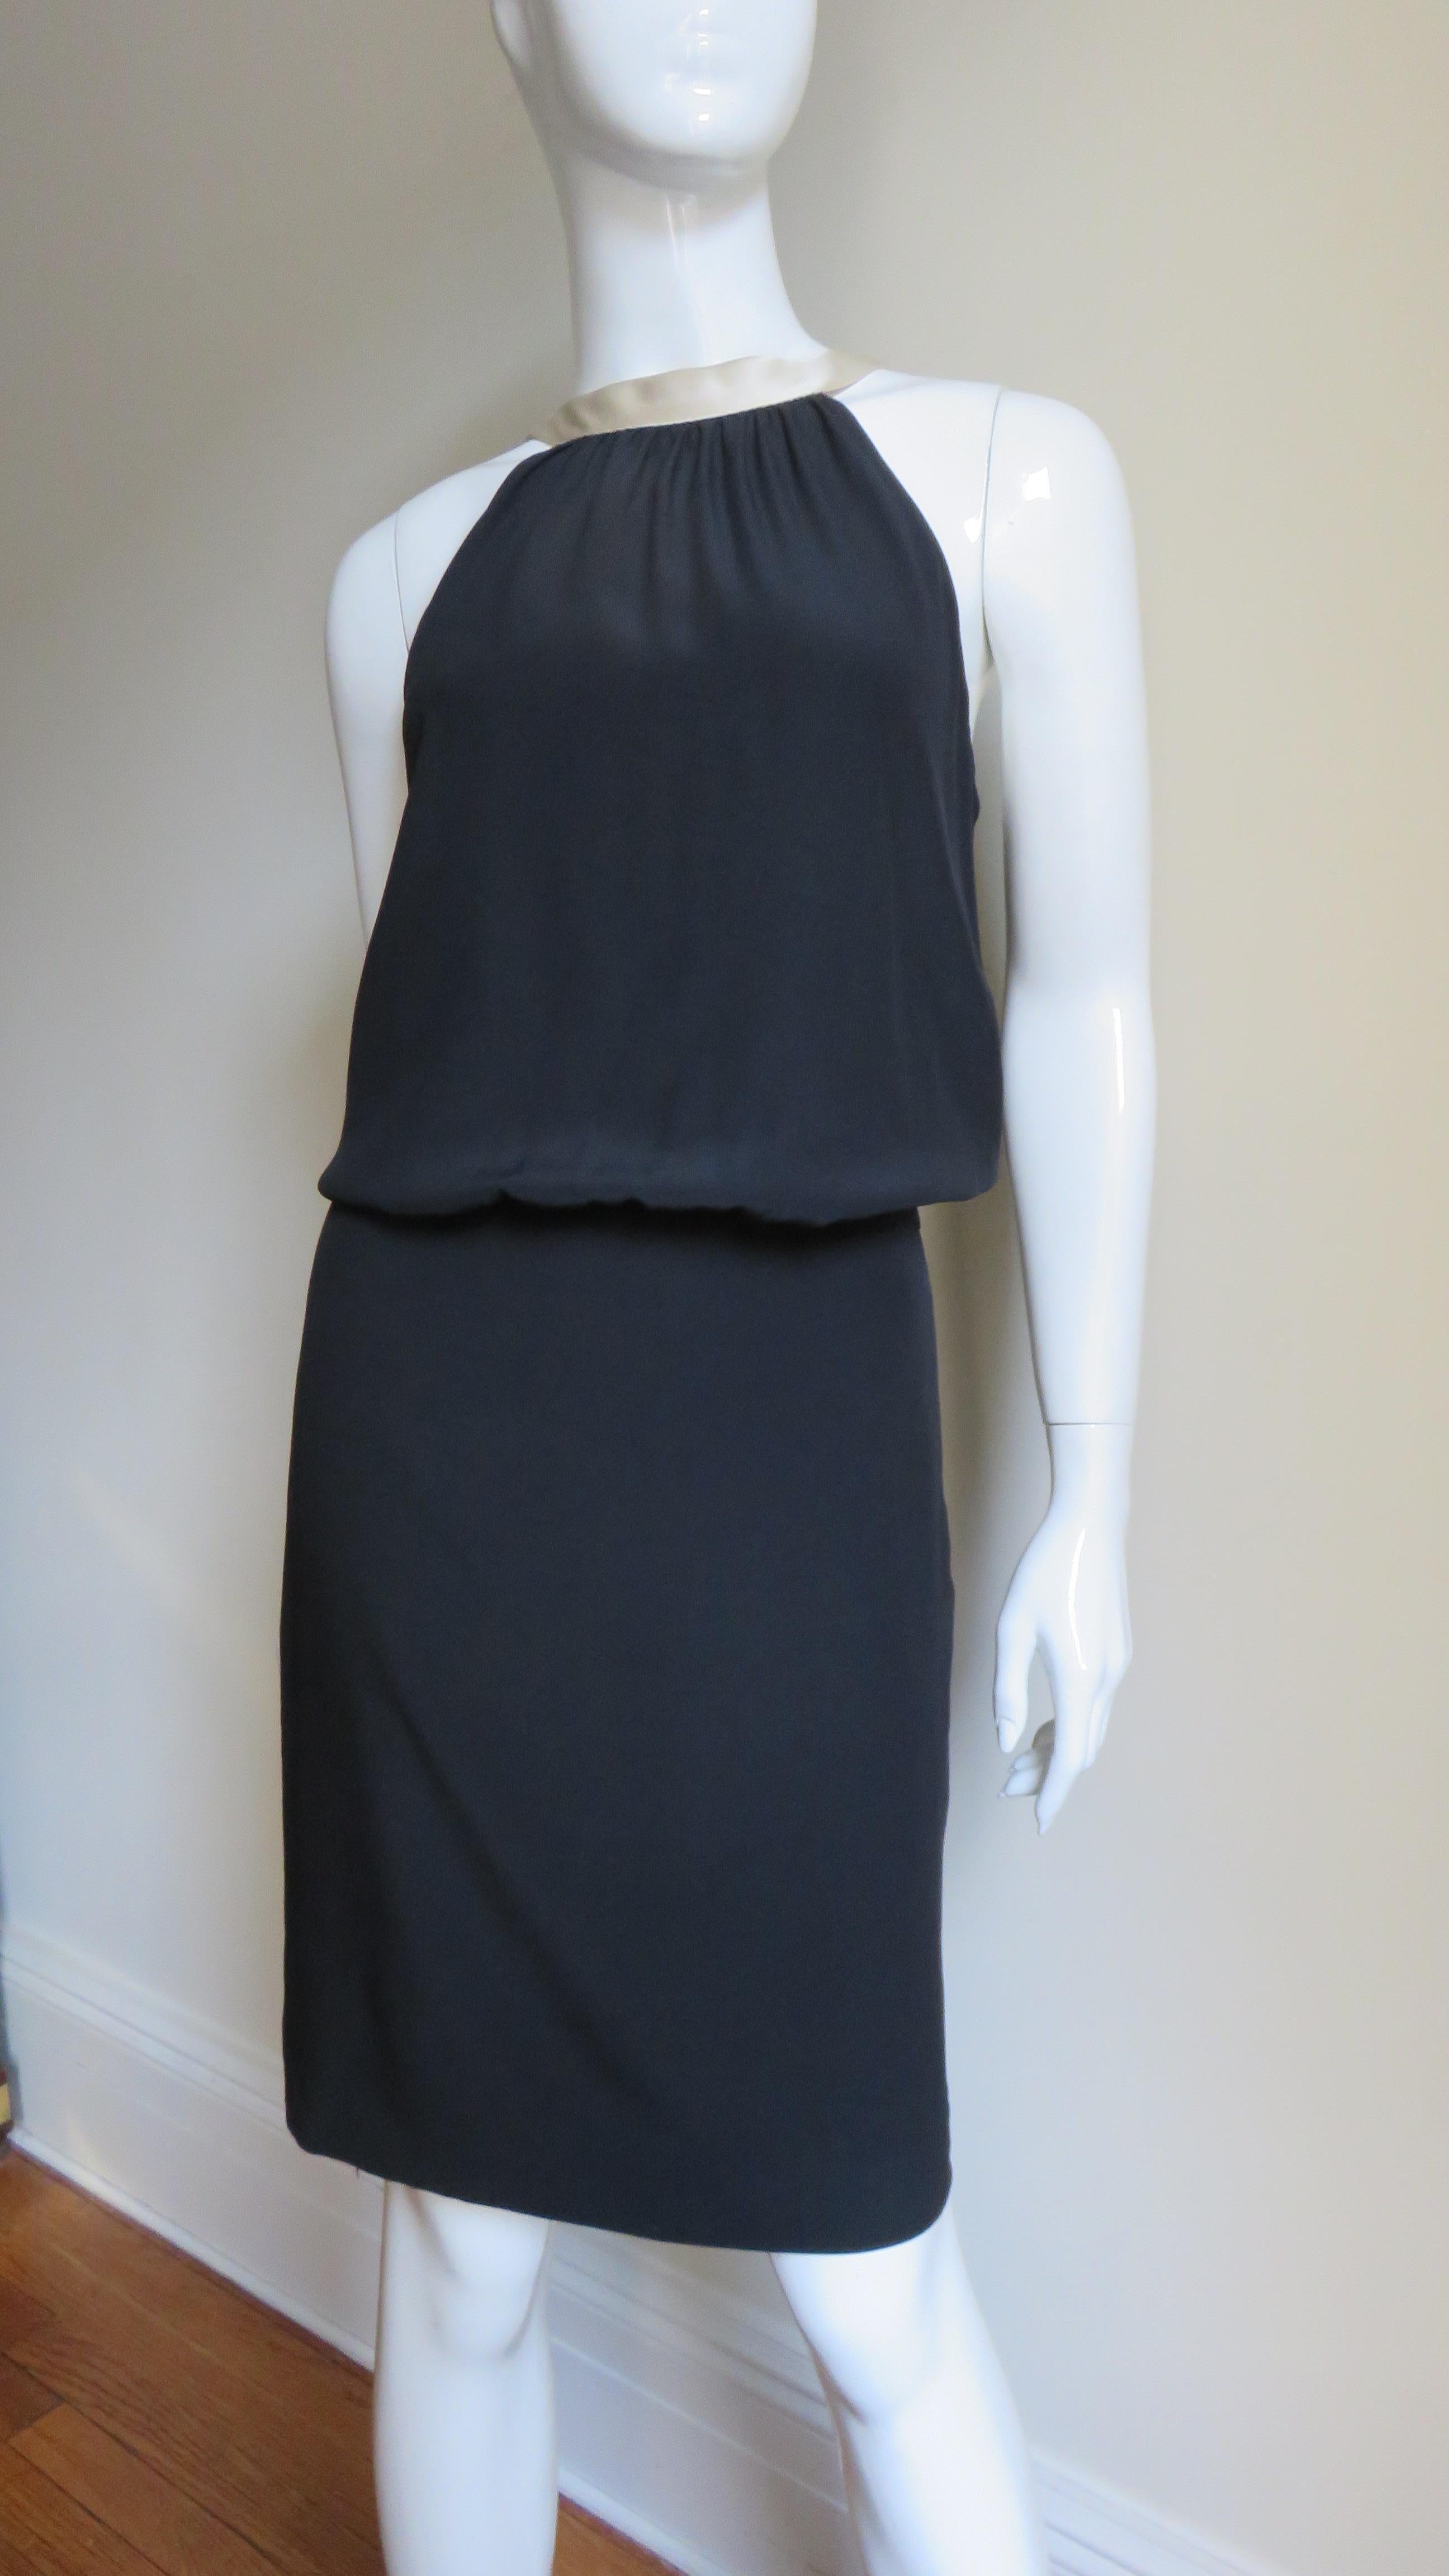 A fun, fabulous black silk dress from Moschino.  It is a sleeveless with a draped bodice and straight skirt.  The scoop back is adorned with a functional off white silk necktie extending down the center back.  Fabulous.  It is fully lined and has a